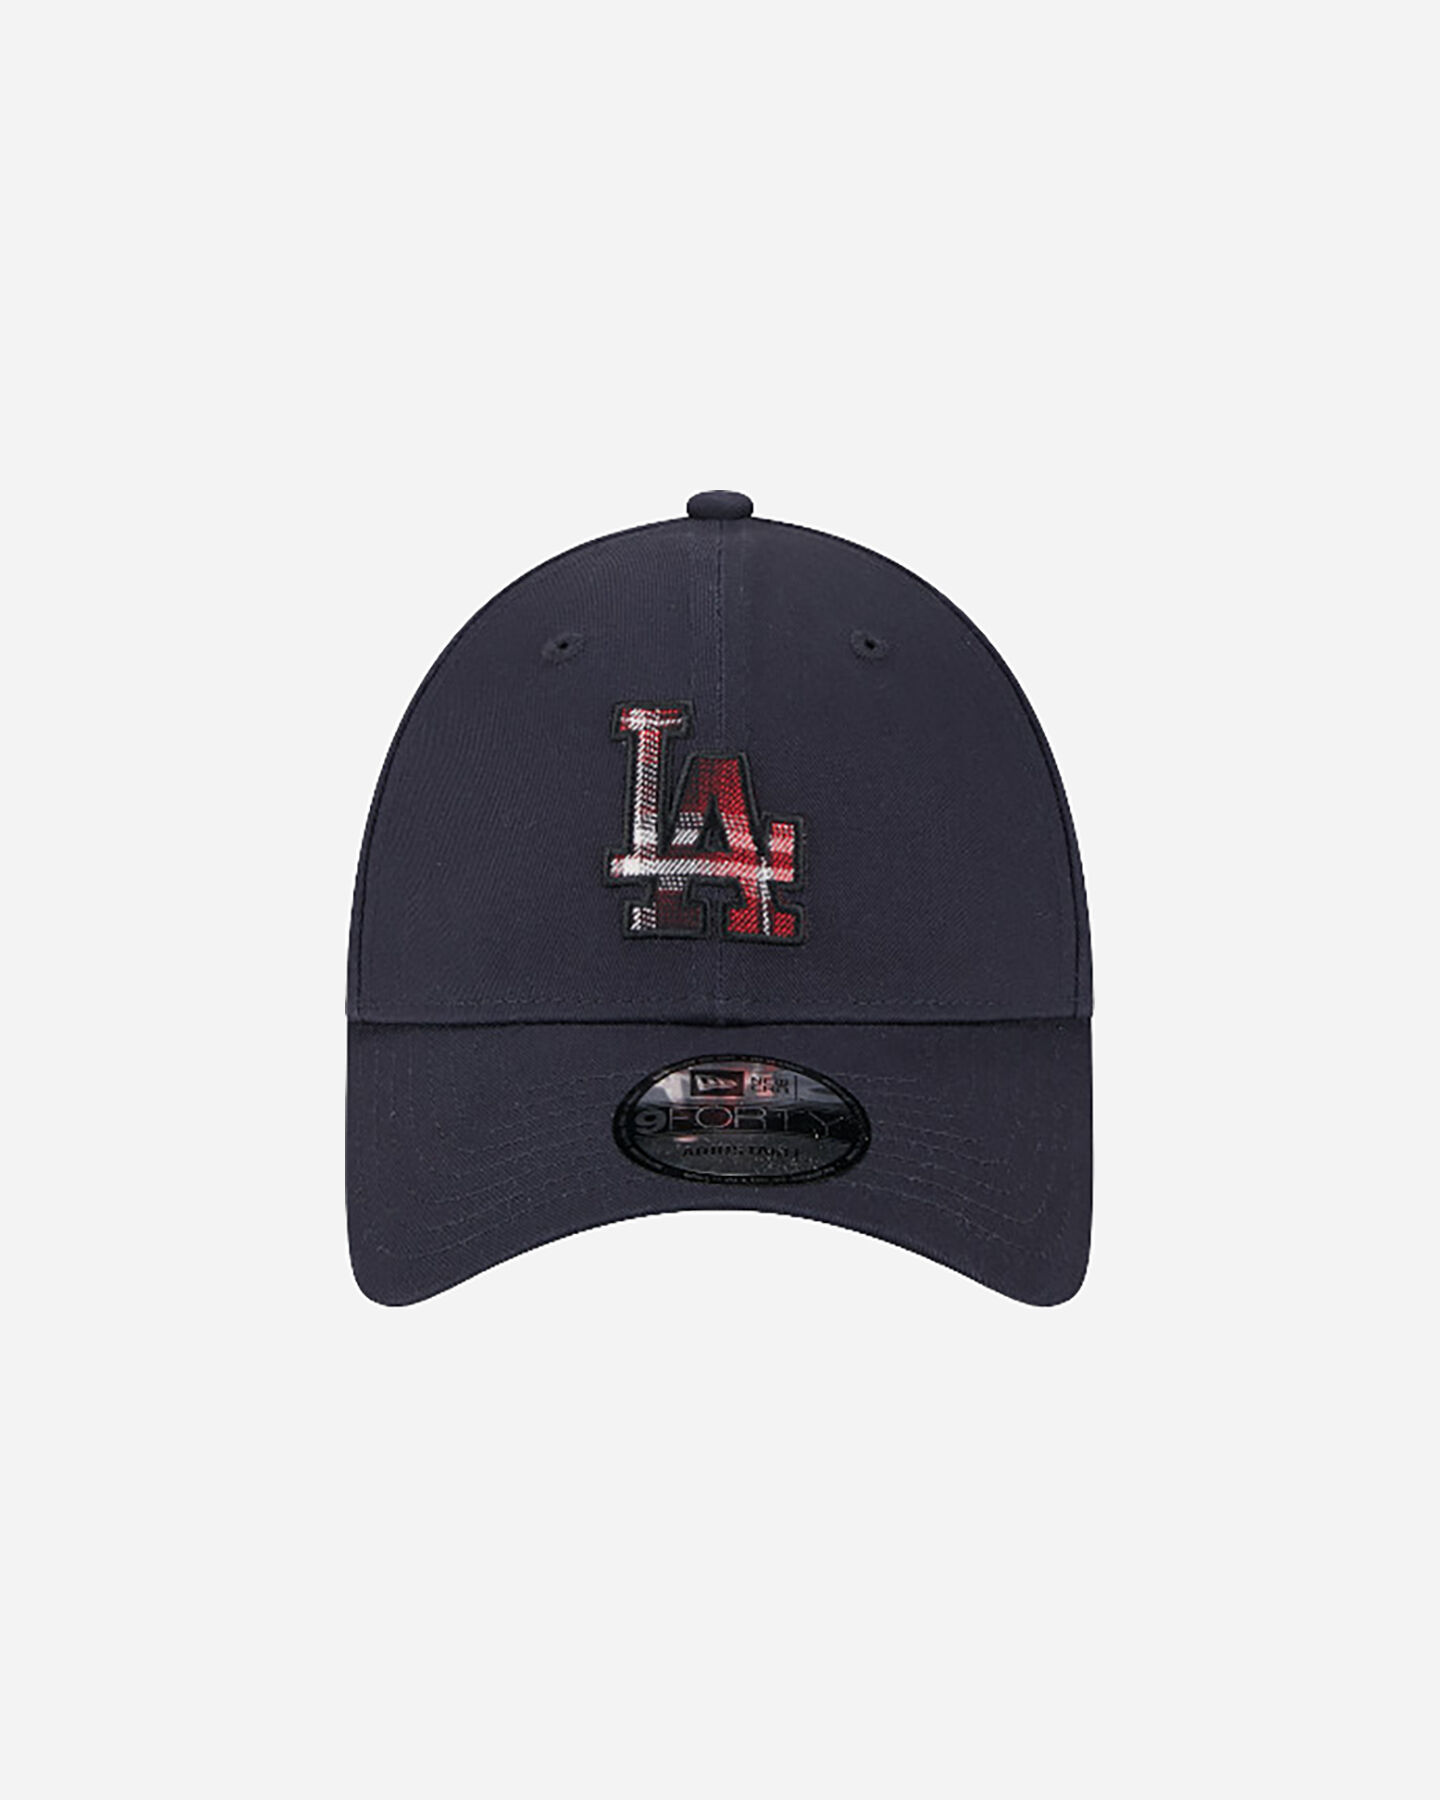  Cappellino NEW ERA 9FORTY MLB CHECK INFILL LOS ANGELES DODGERS  S5630873|410|OSFM scatto 1